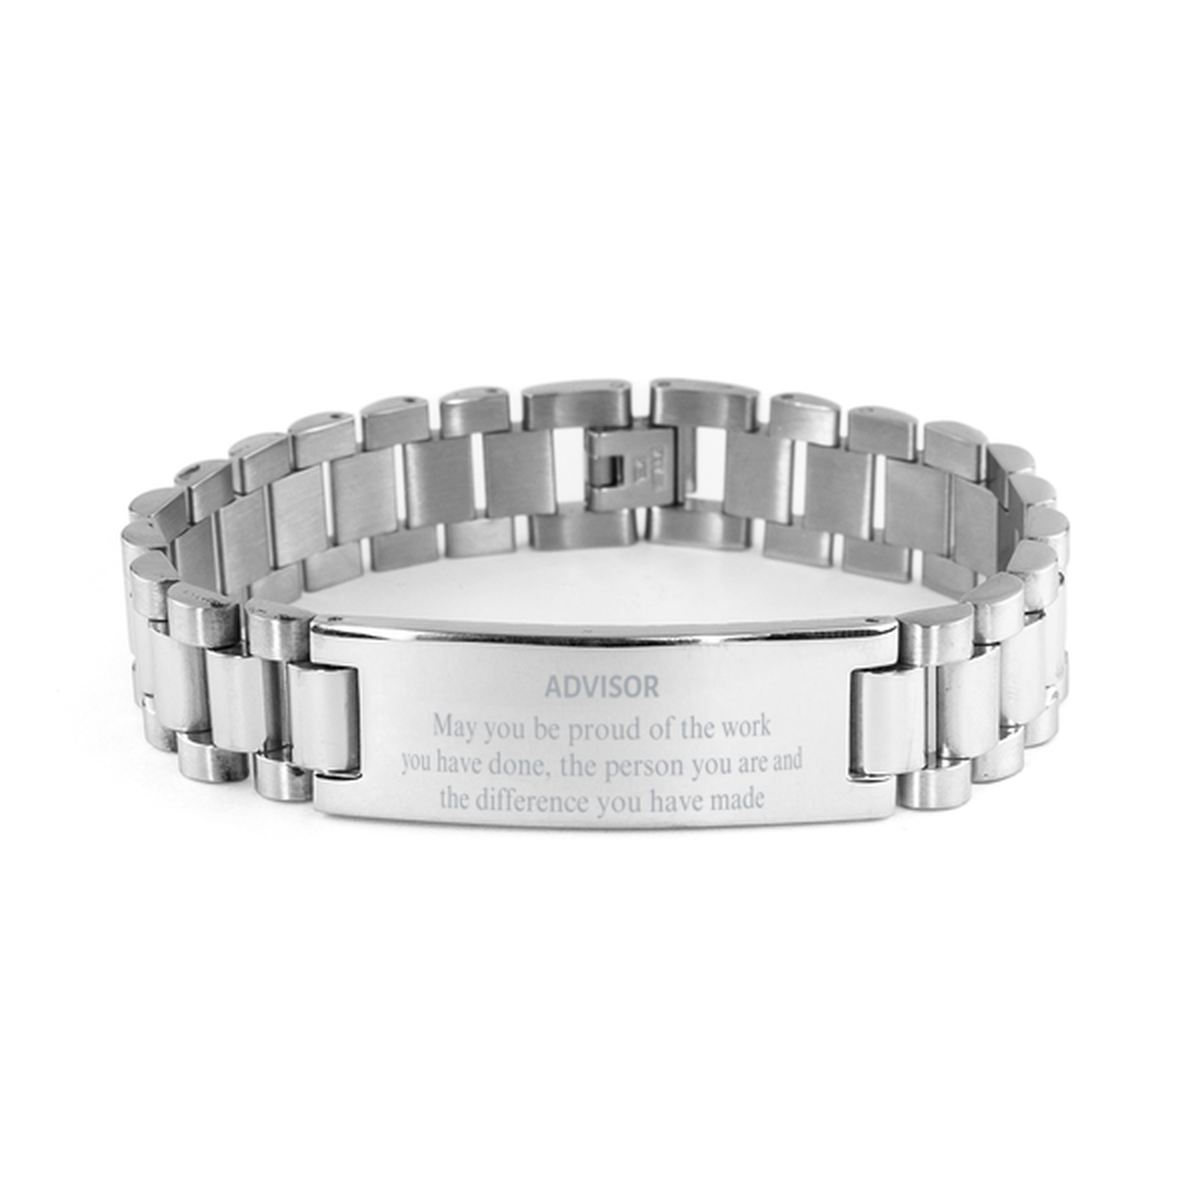 Advisor May you be proud of the work you have done, Retirement Advisor Ladder Stainless Steel Bracelet for Colleague Appreciation Gifts Amazing for Advisor